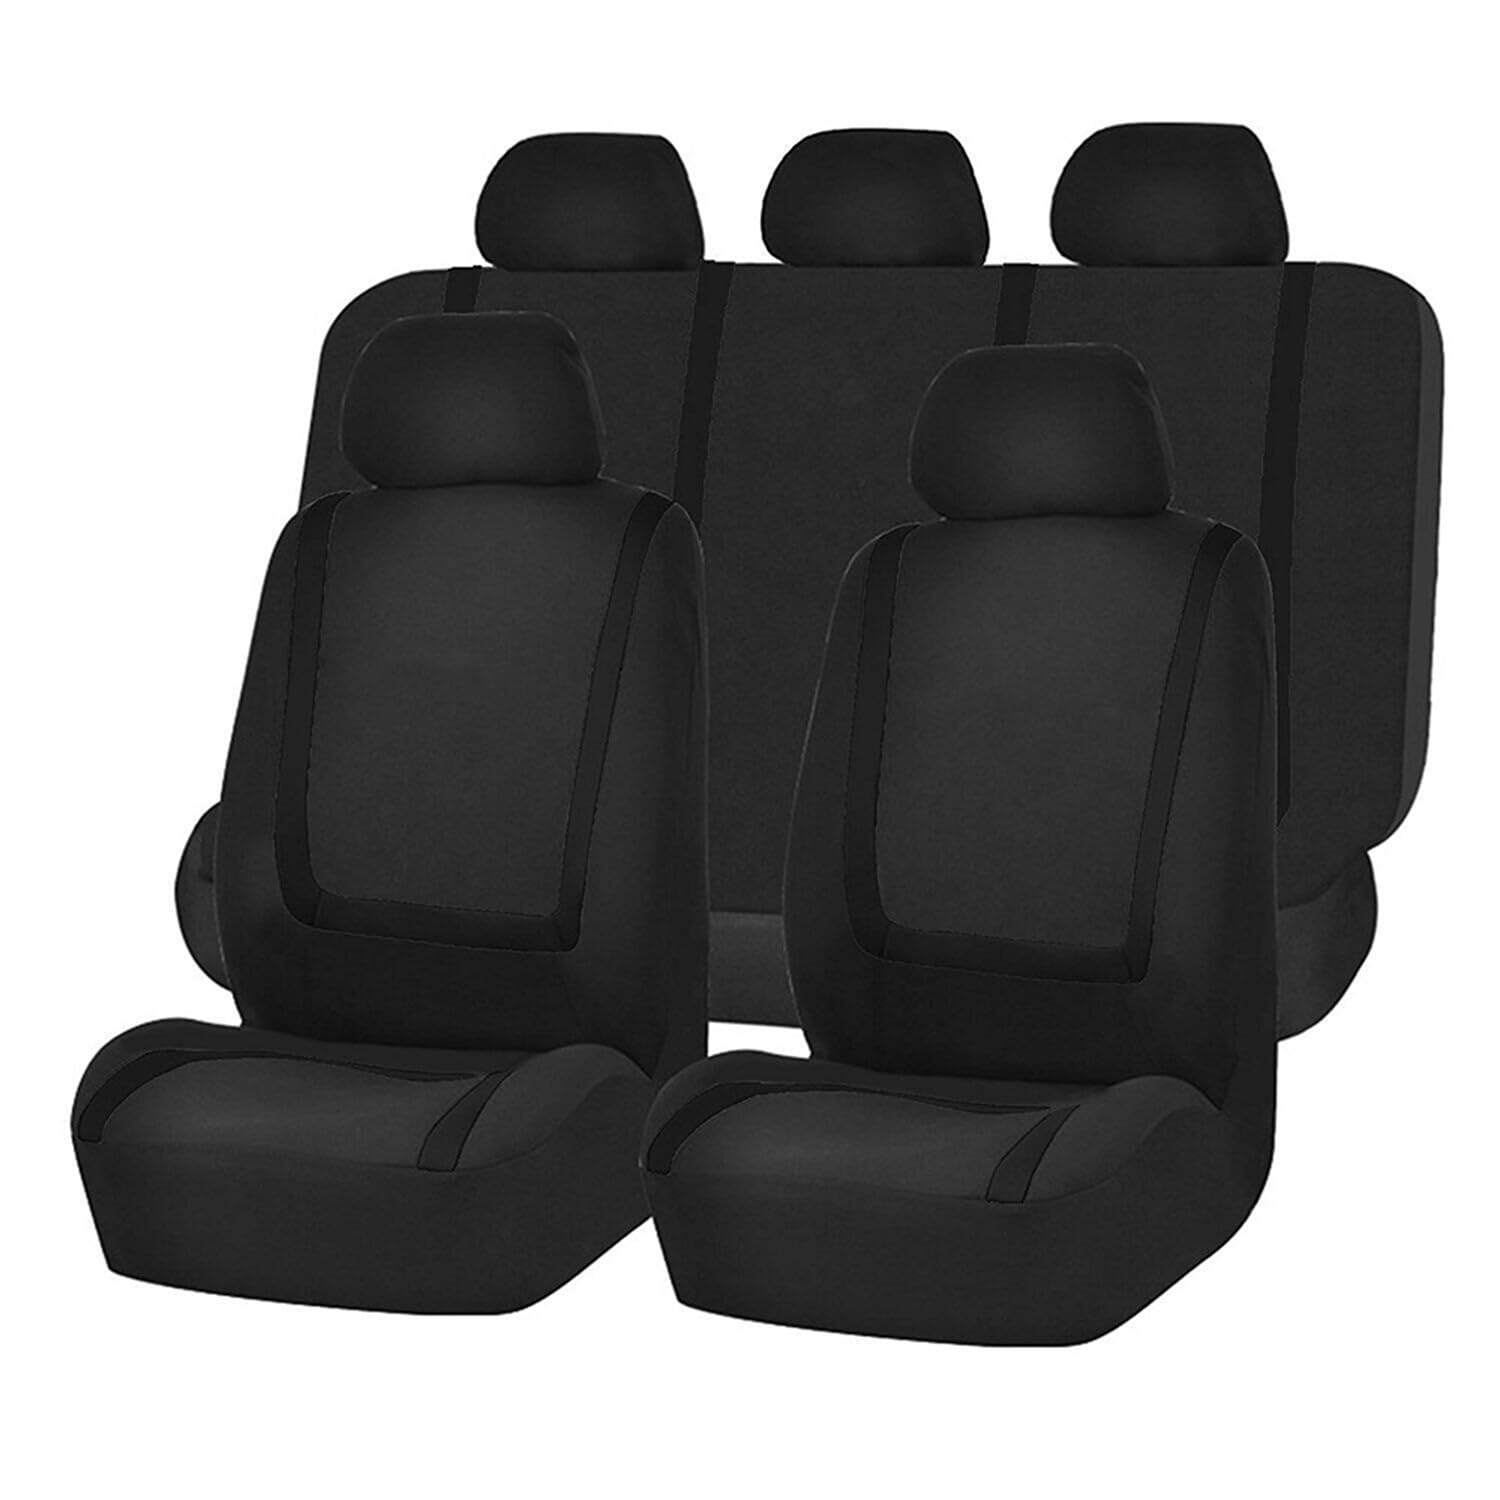 INGKE Car Seat Covers Full Set for Audi A1 (GB) 2018-2023,9pcs All-Weather Breathable Waterproof Comfortable Seat Cover,A-Full Black von INGKE